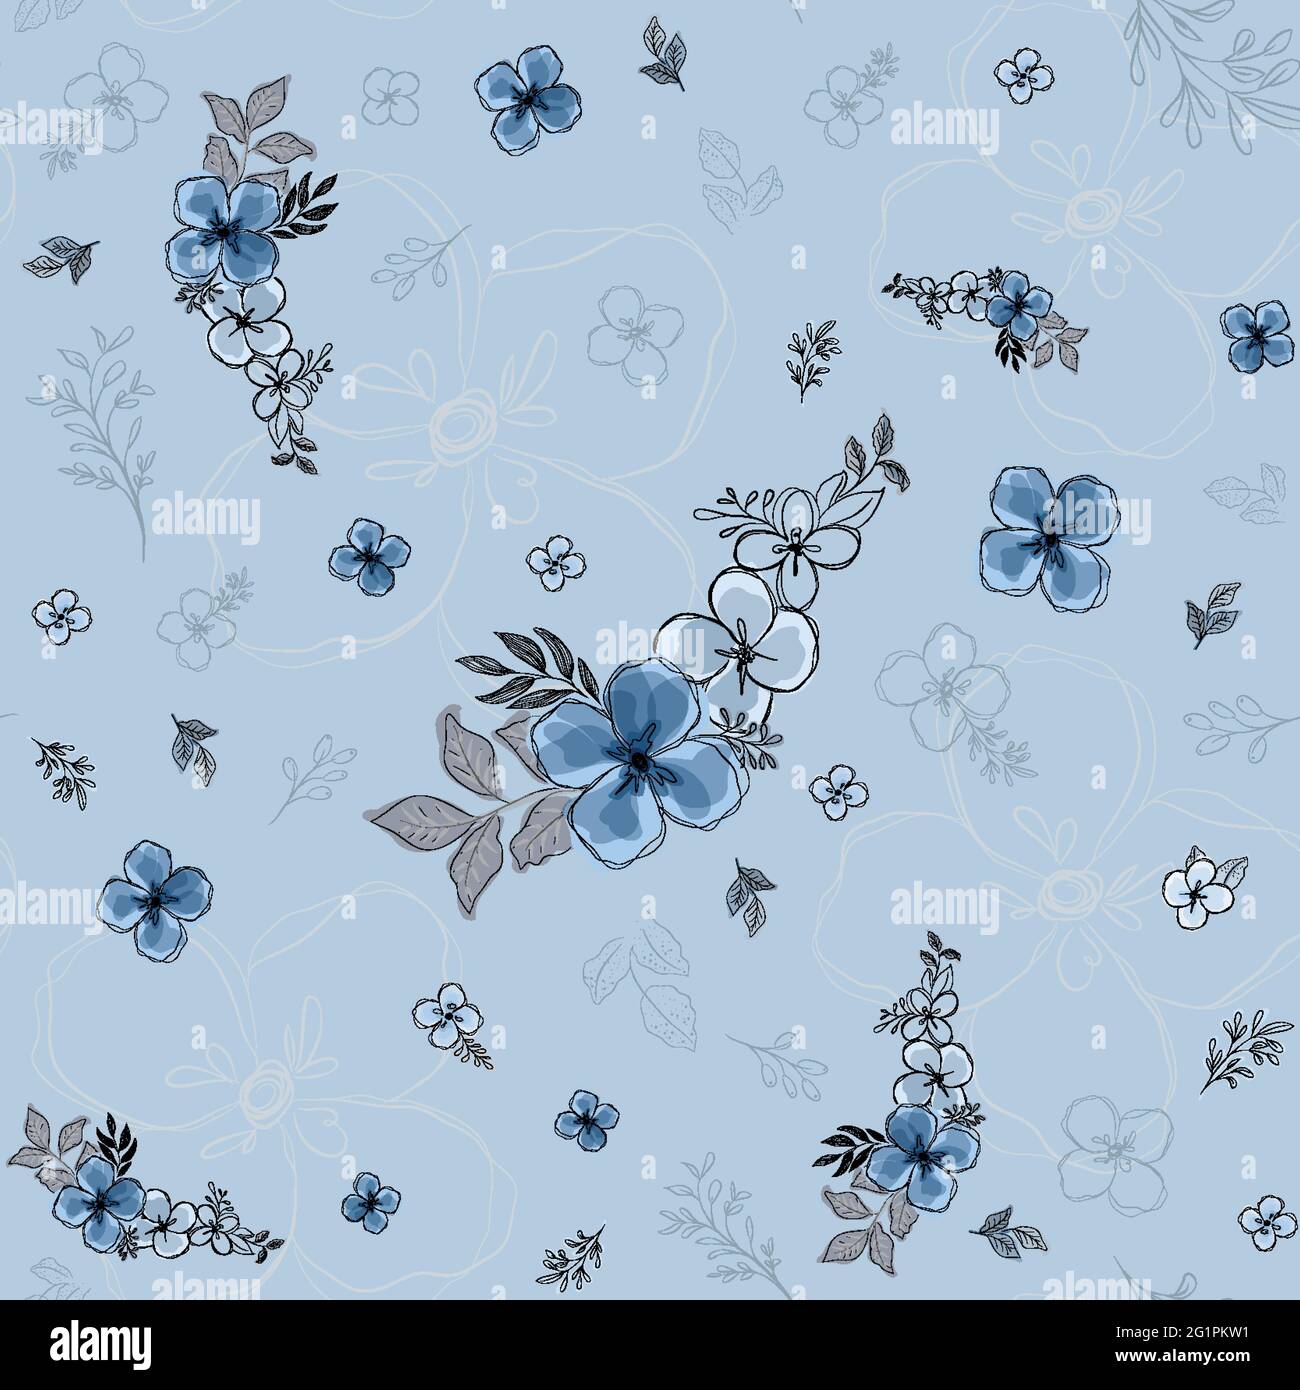 Seamless pattern with beautiful floral watercolor style on blue background. The other 2 color swatches included. Stock Vector